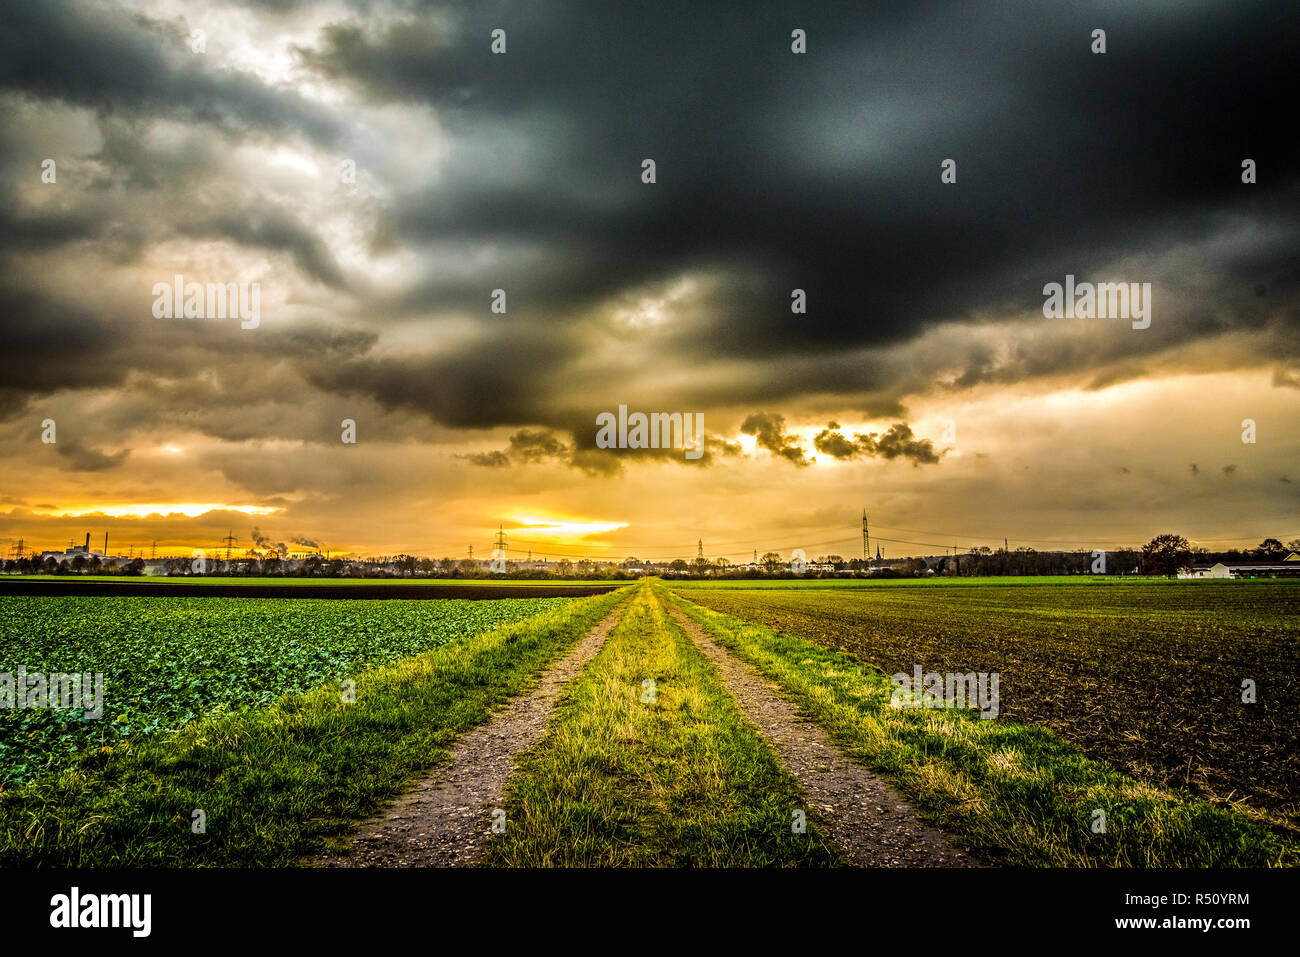 dirt road in front of a dramatic sky Stock Photo